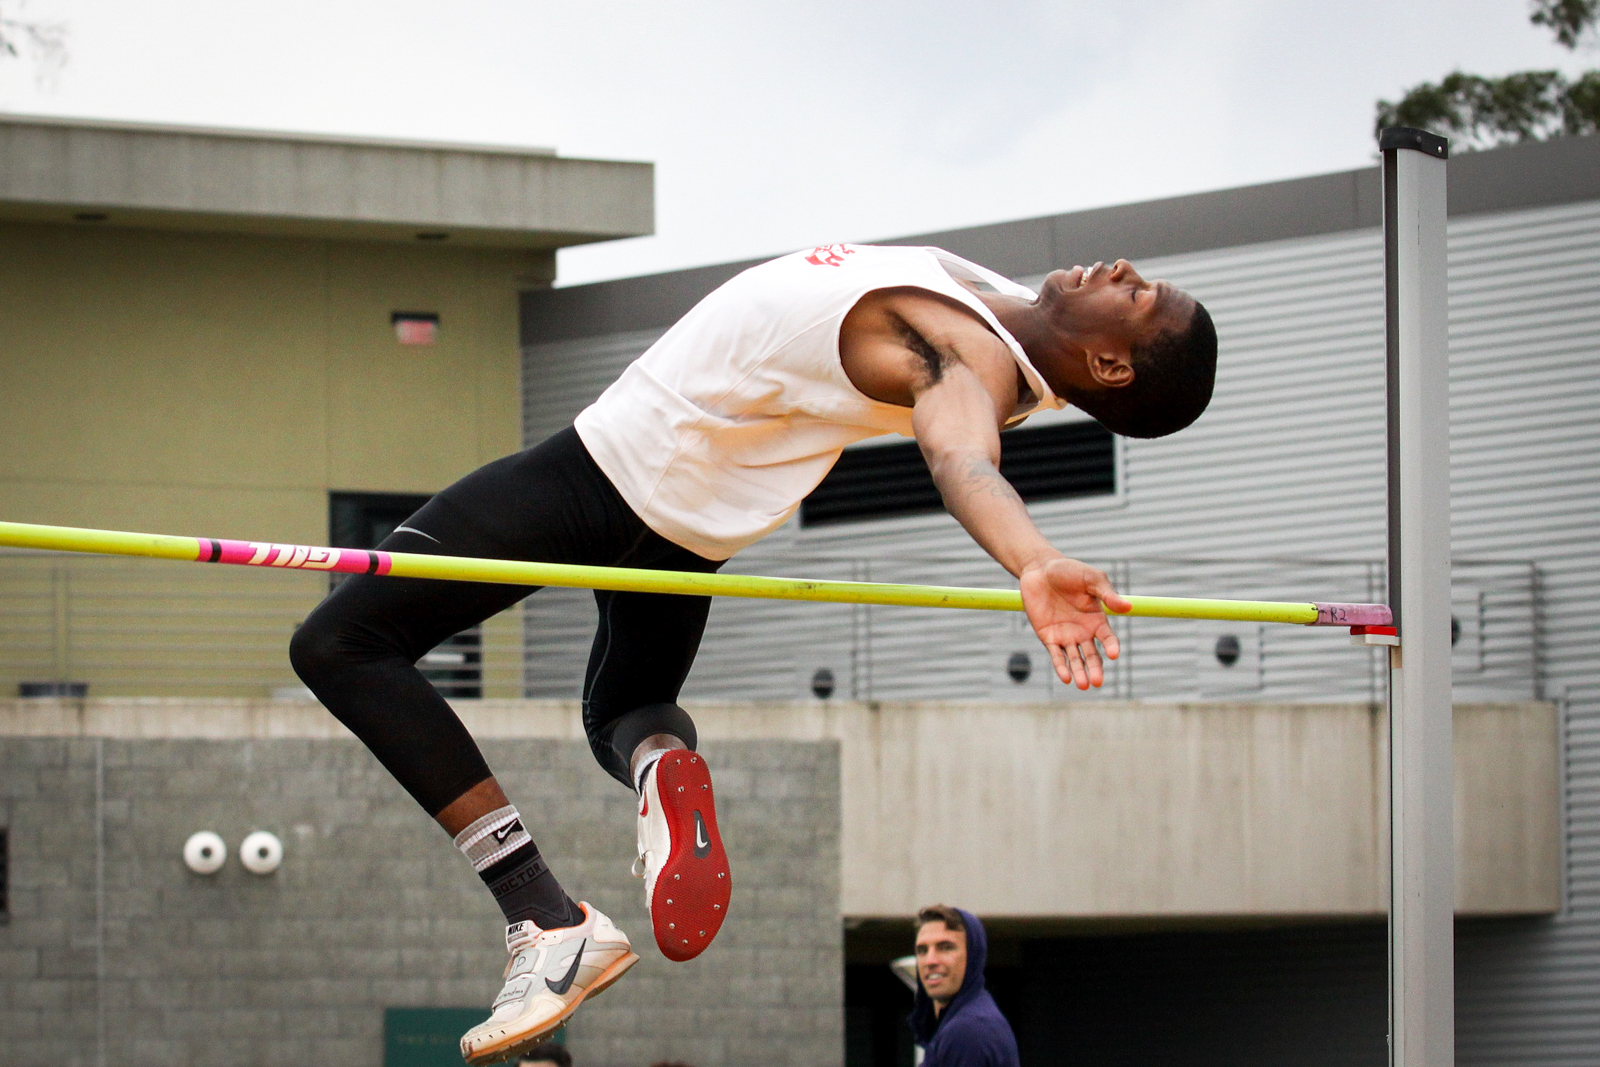 Freshman Rodney Morgan attempts a high jump at the SF State Johnnu Mathis invitational on February 24, 2017. Morgan will later tie the state record for the High Jump at this invitational.